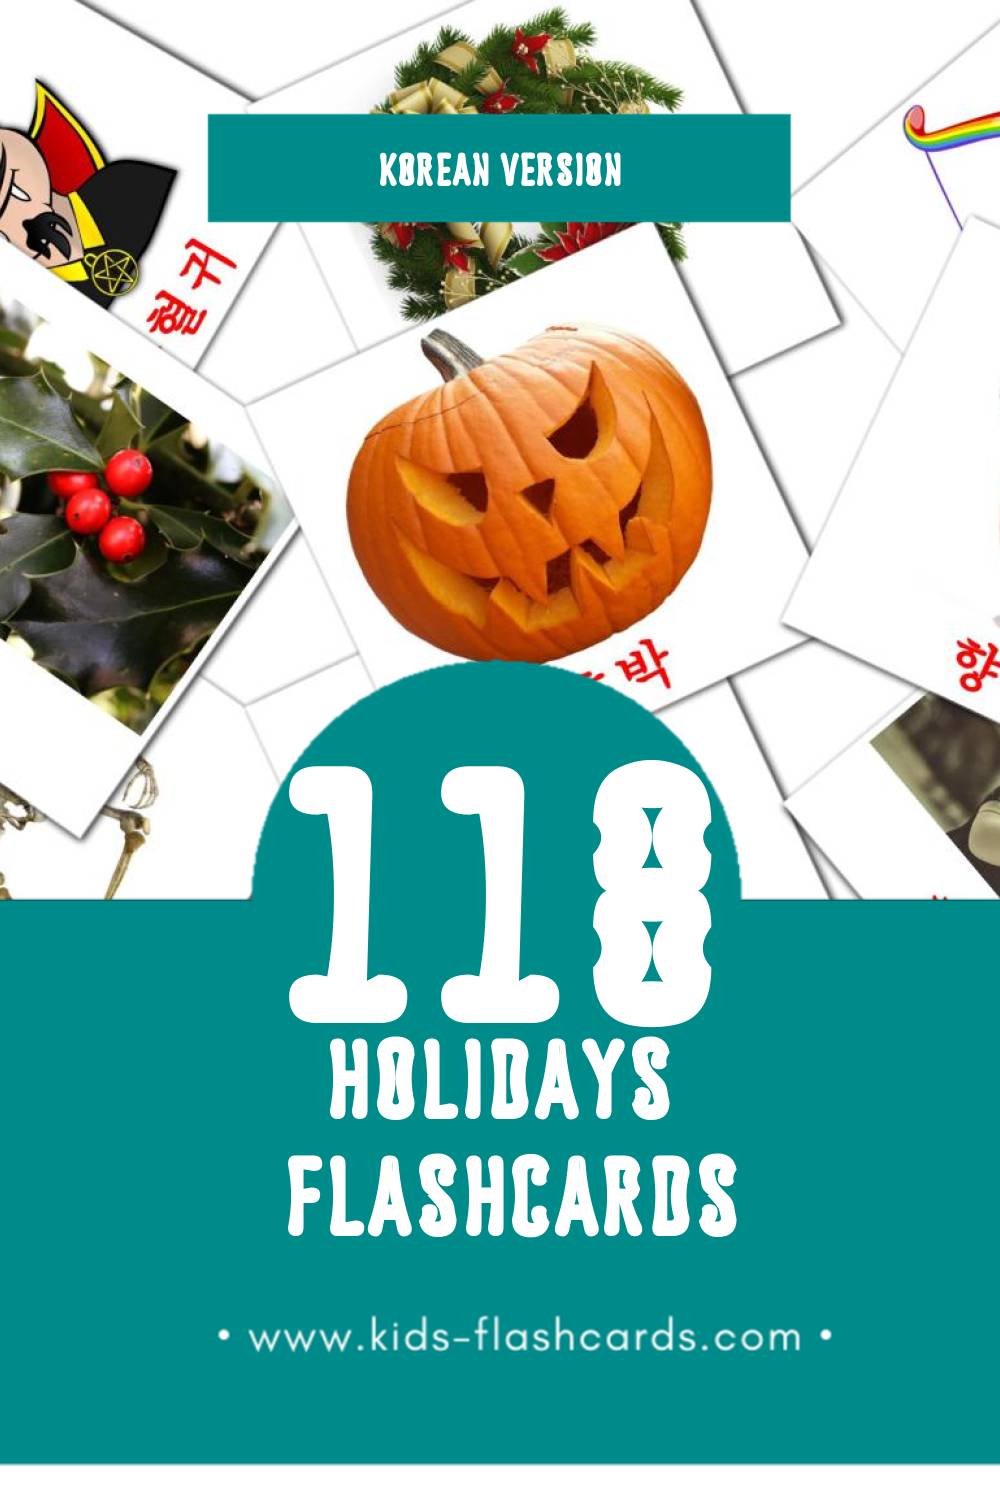 Visual 휴가 Flashcards for Toddlers (34 cards in Korean)